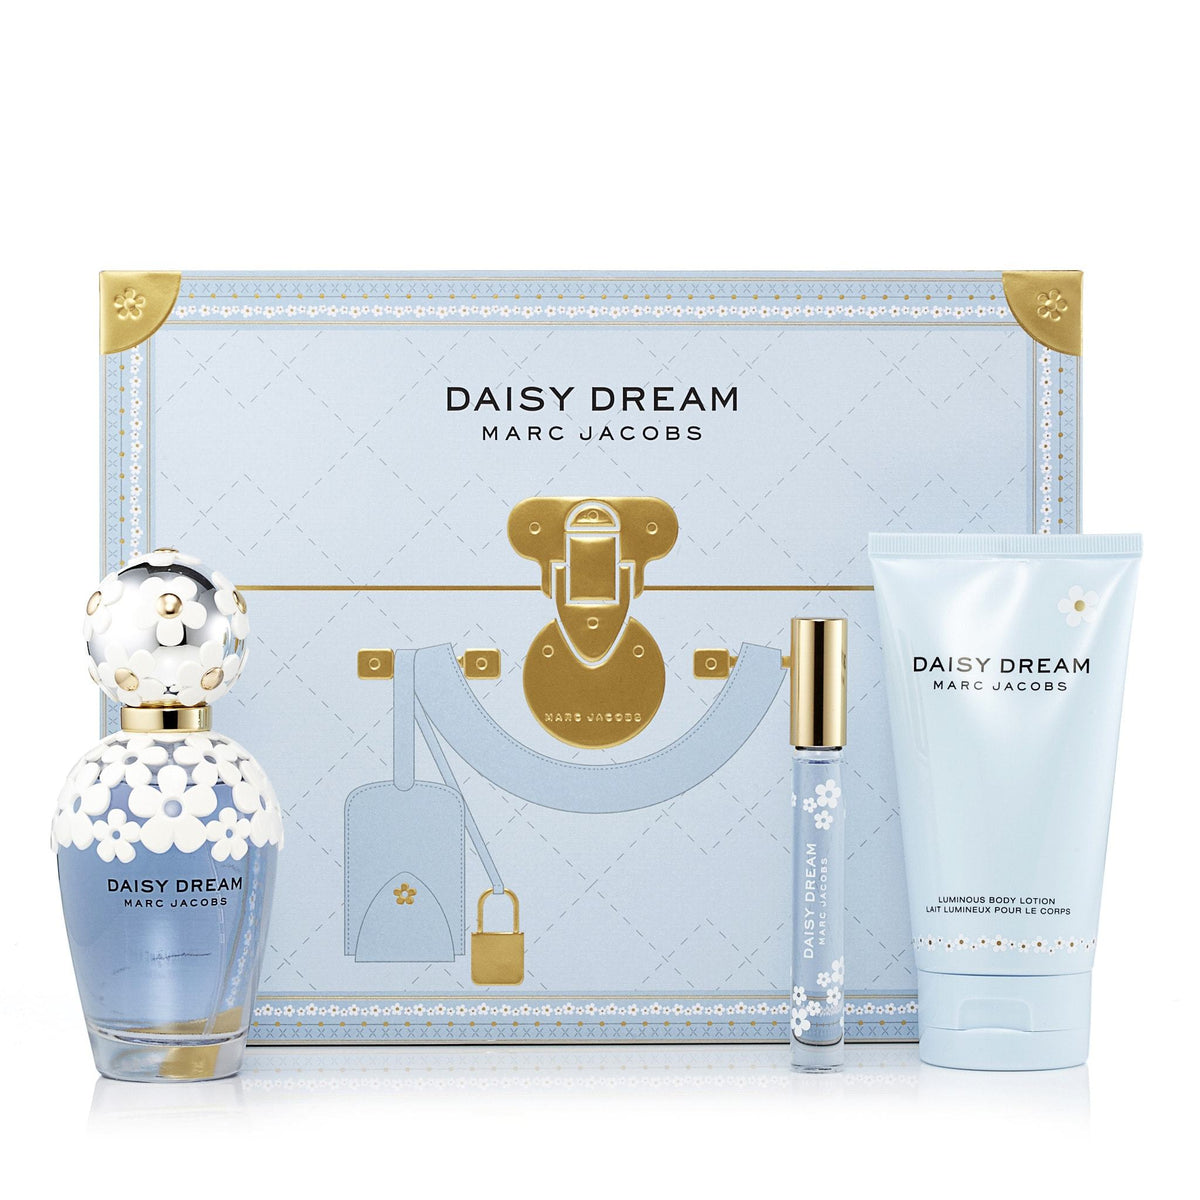 Daisy Dream Gift Set for Women by Marc Jacobs 3.4 oz.